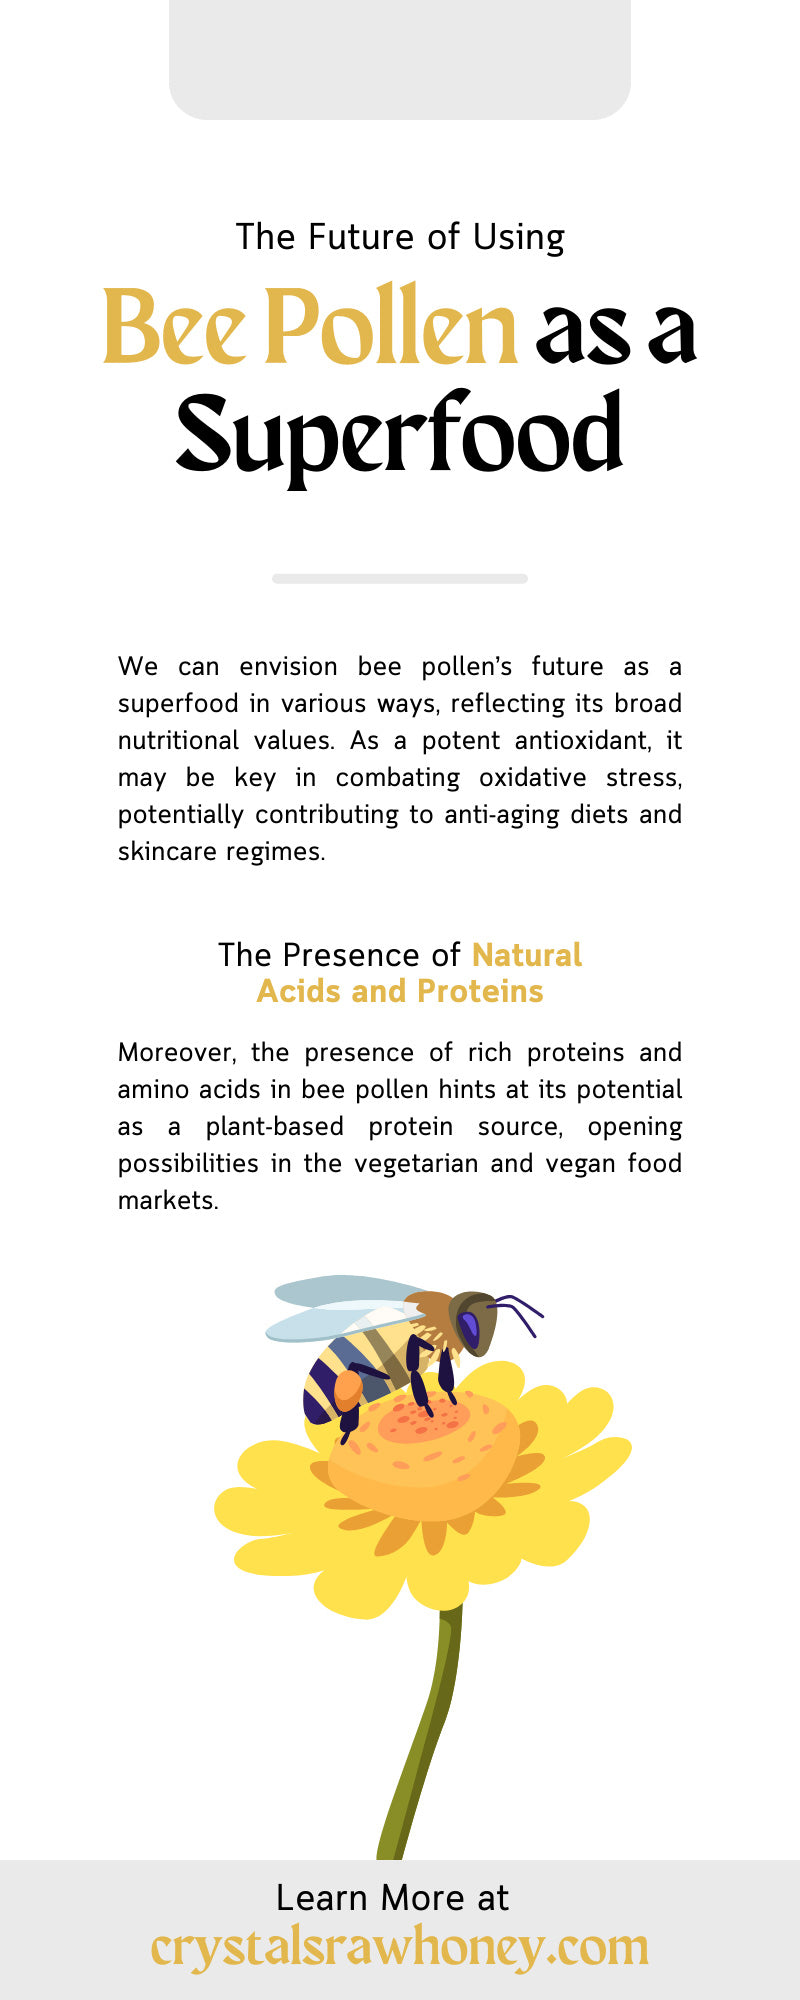 The Future of Using Bee Pollen as a Superfood